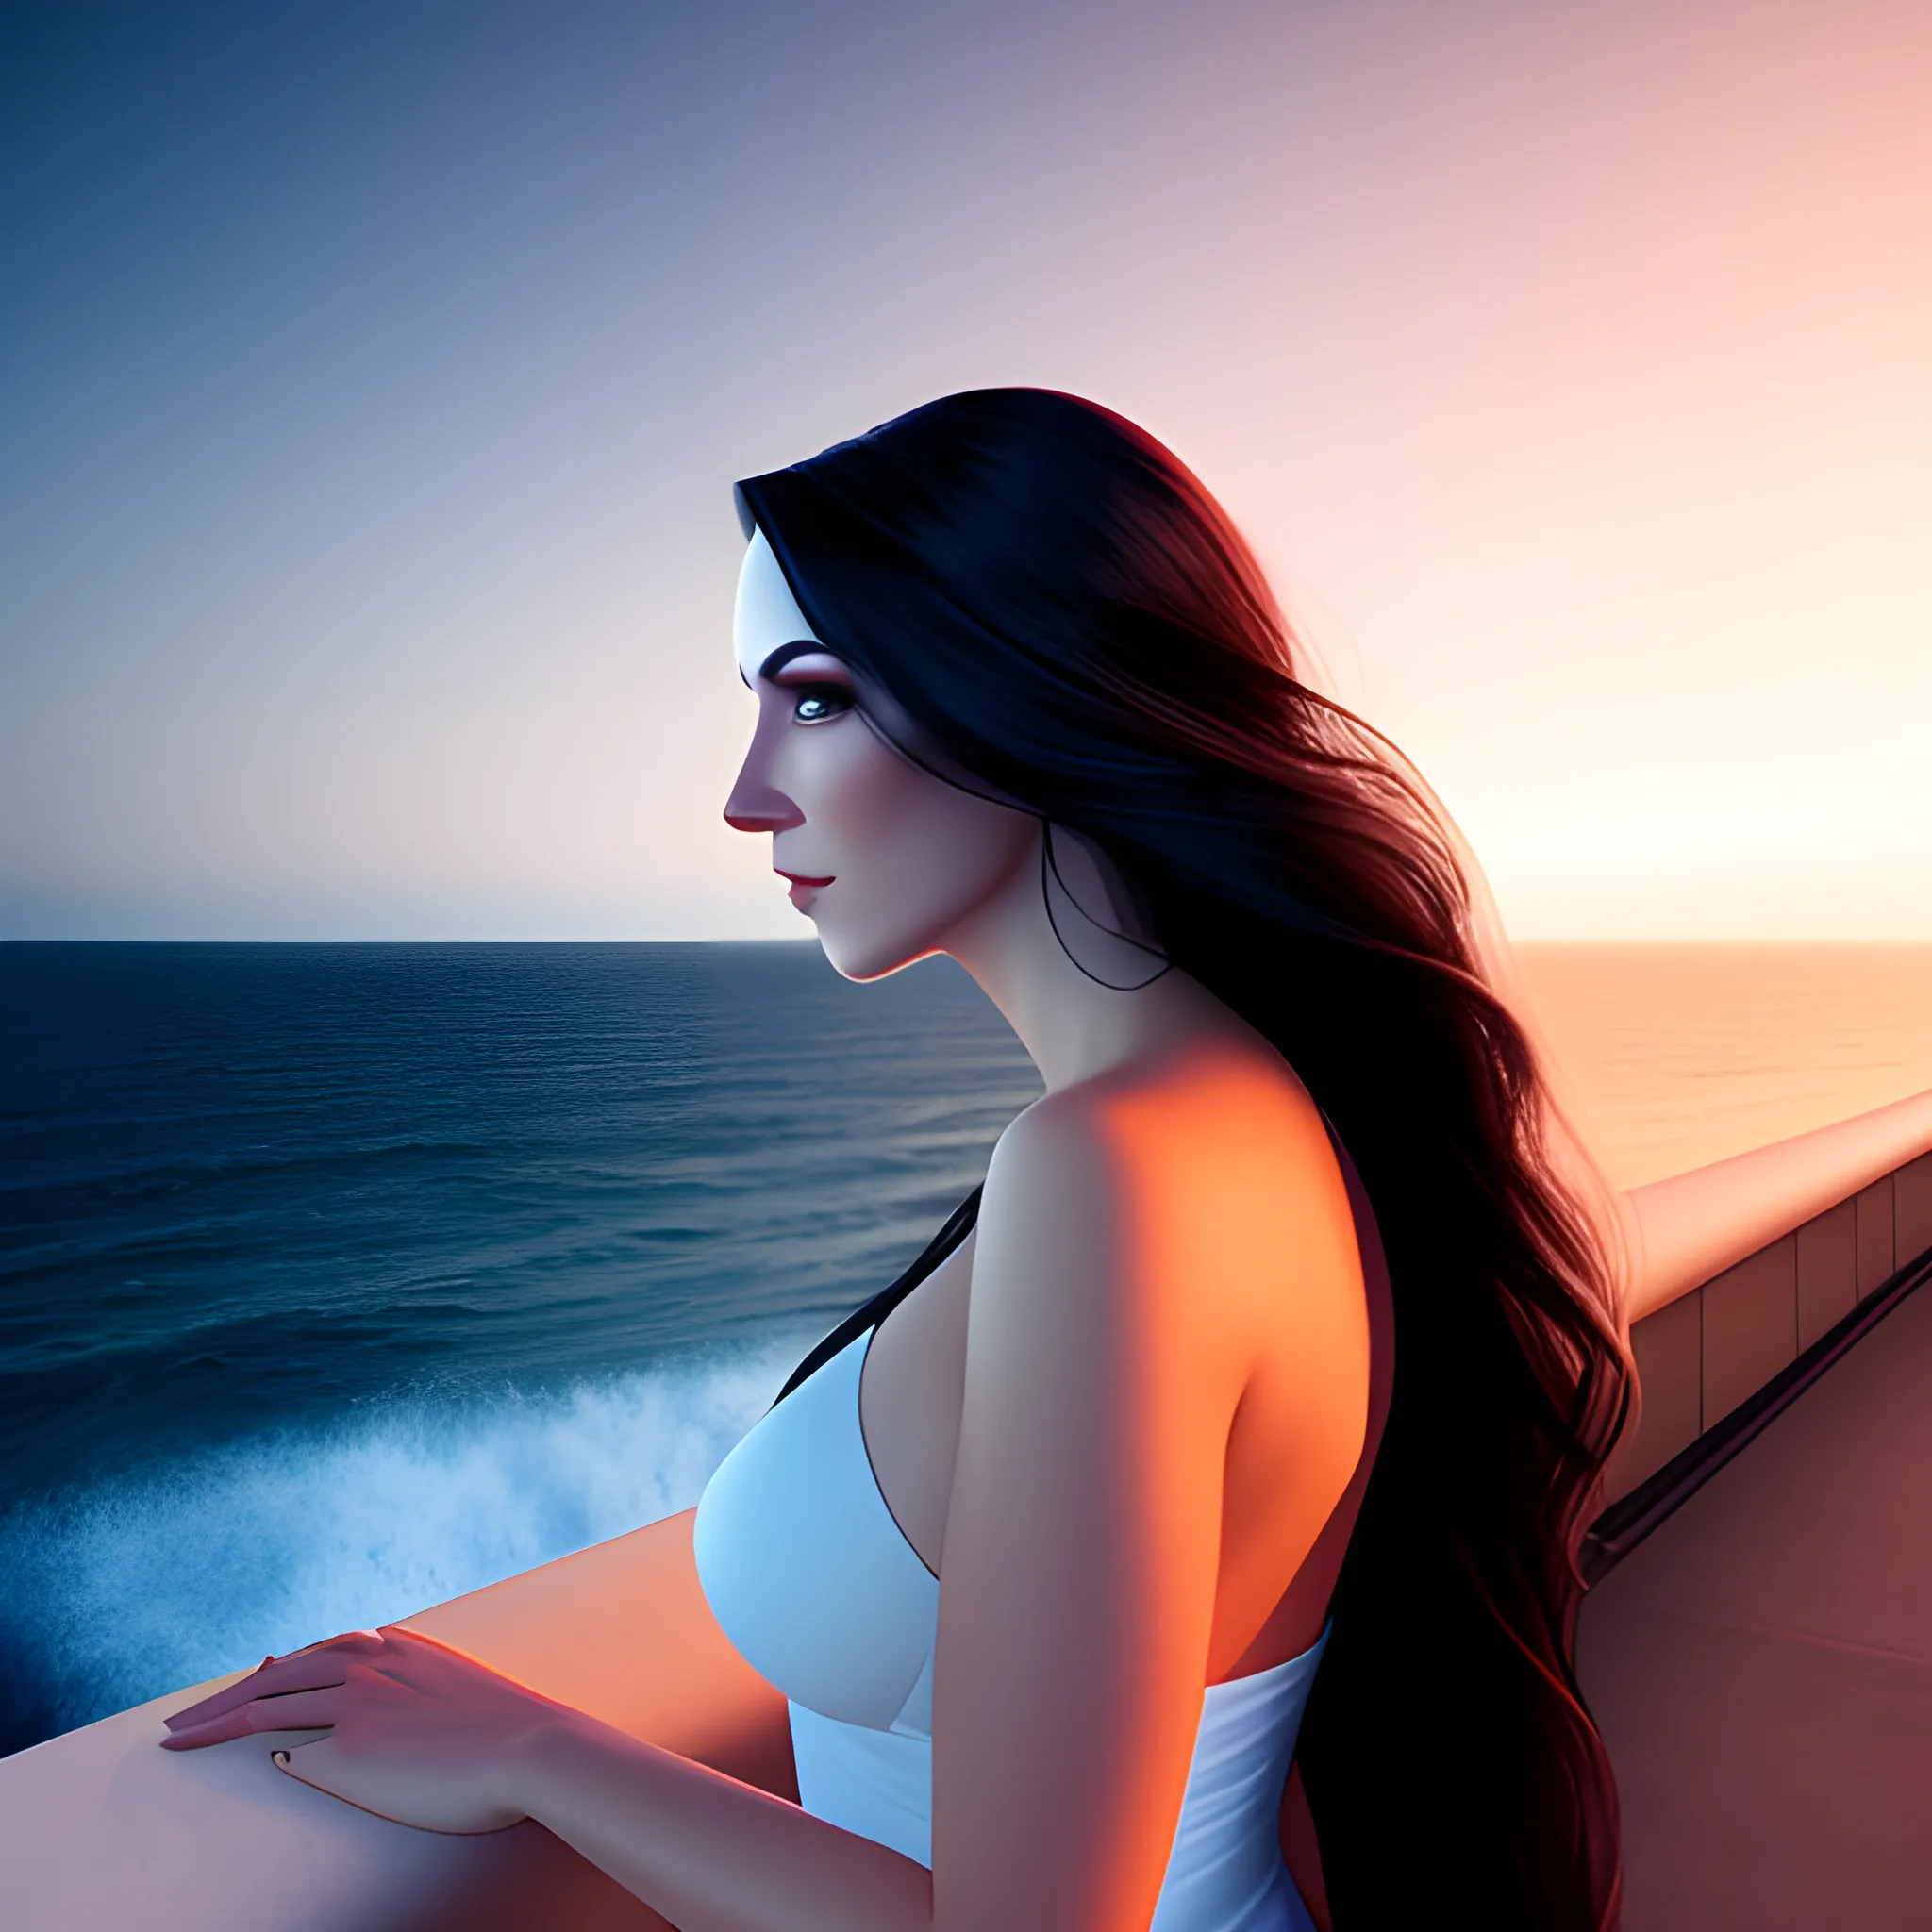 A very beautiful girl with long dark hair looking at the sea at night, photorealistic, high quality photography